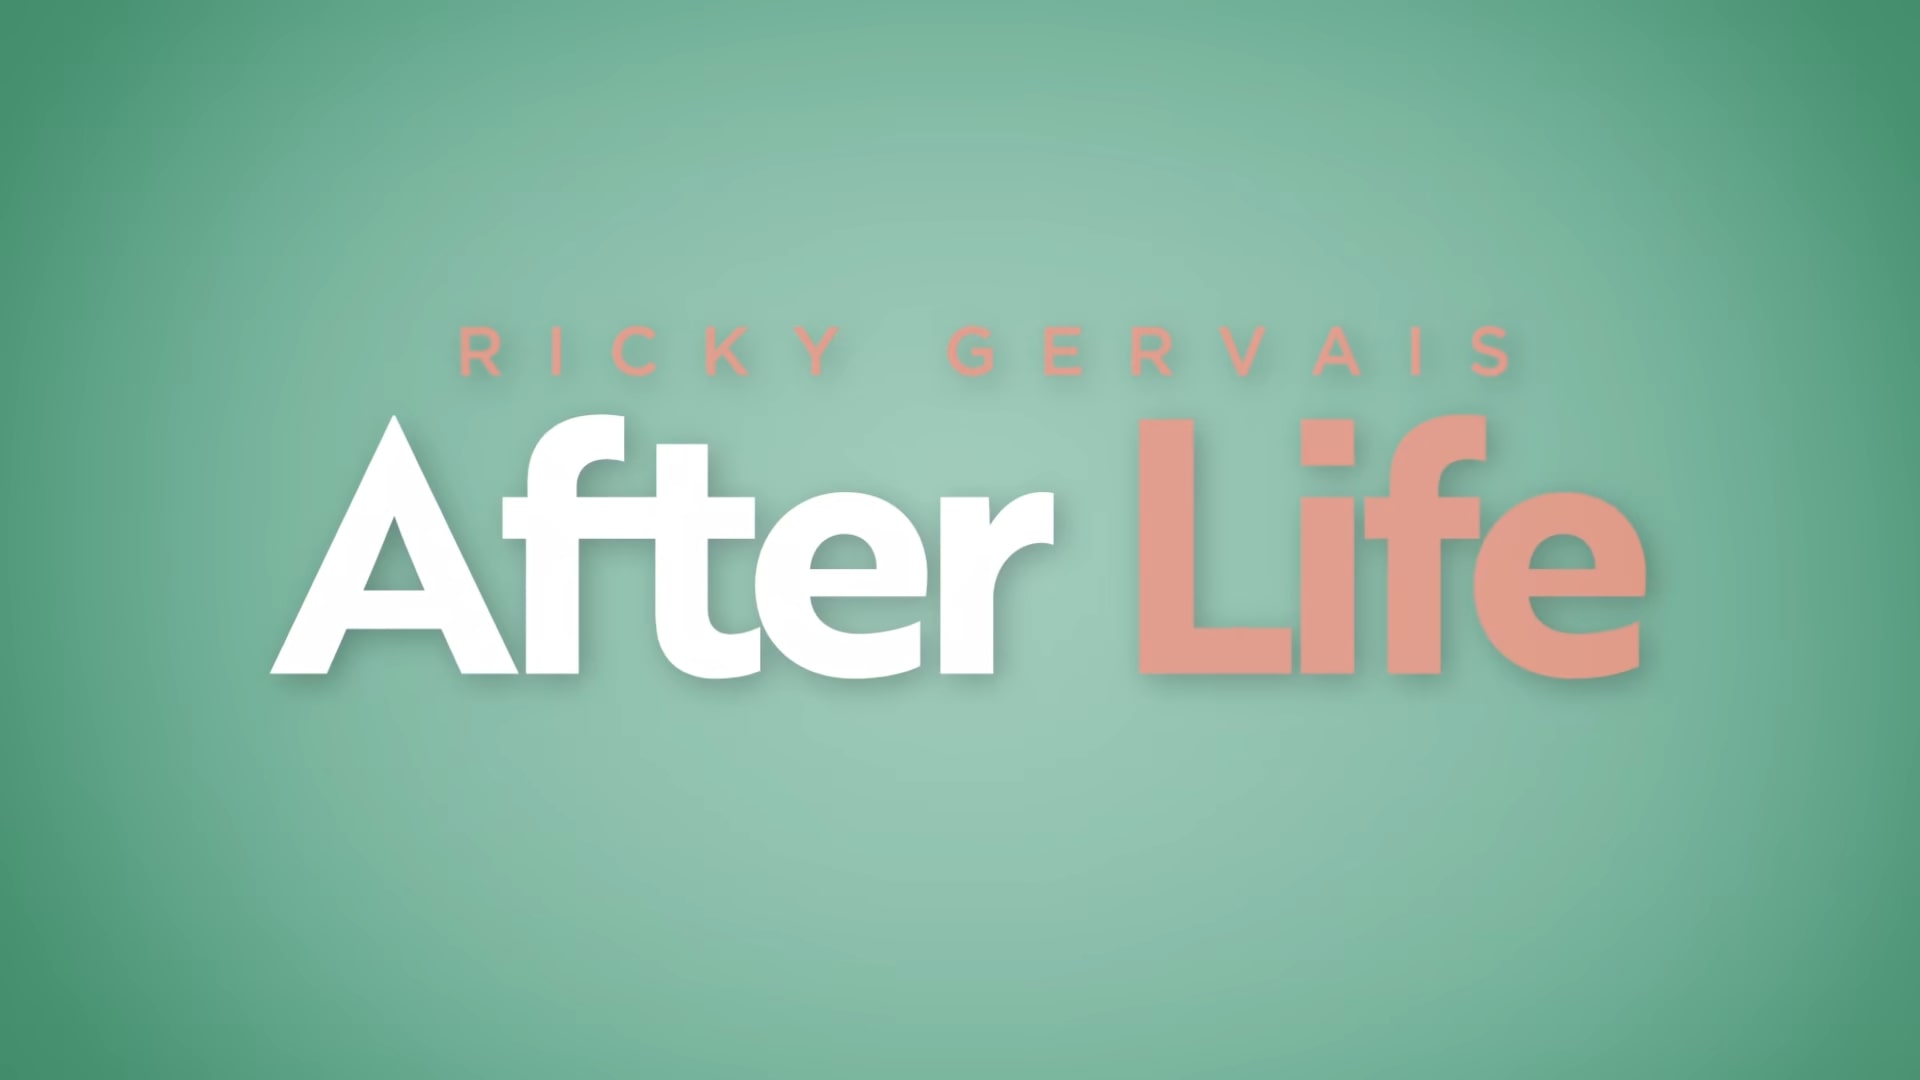 After Life Season 3 Trailer, Coming to Netflix in January 2022